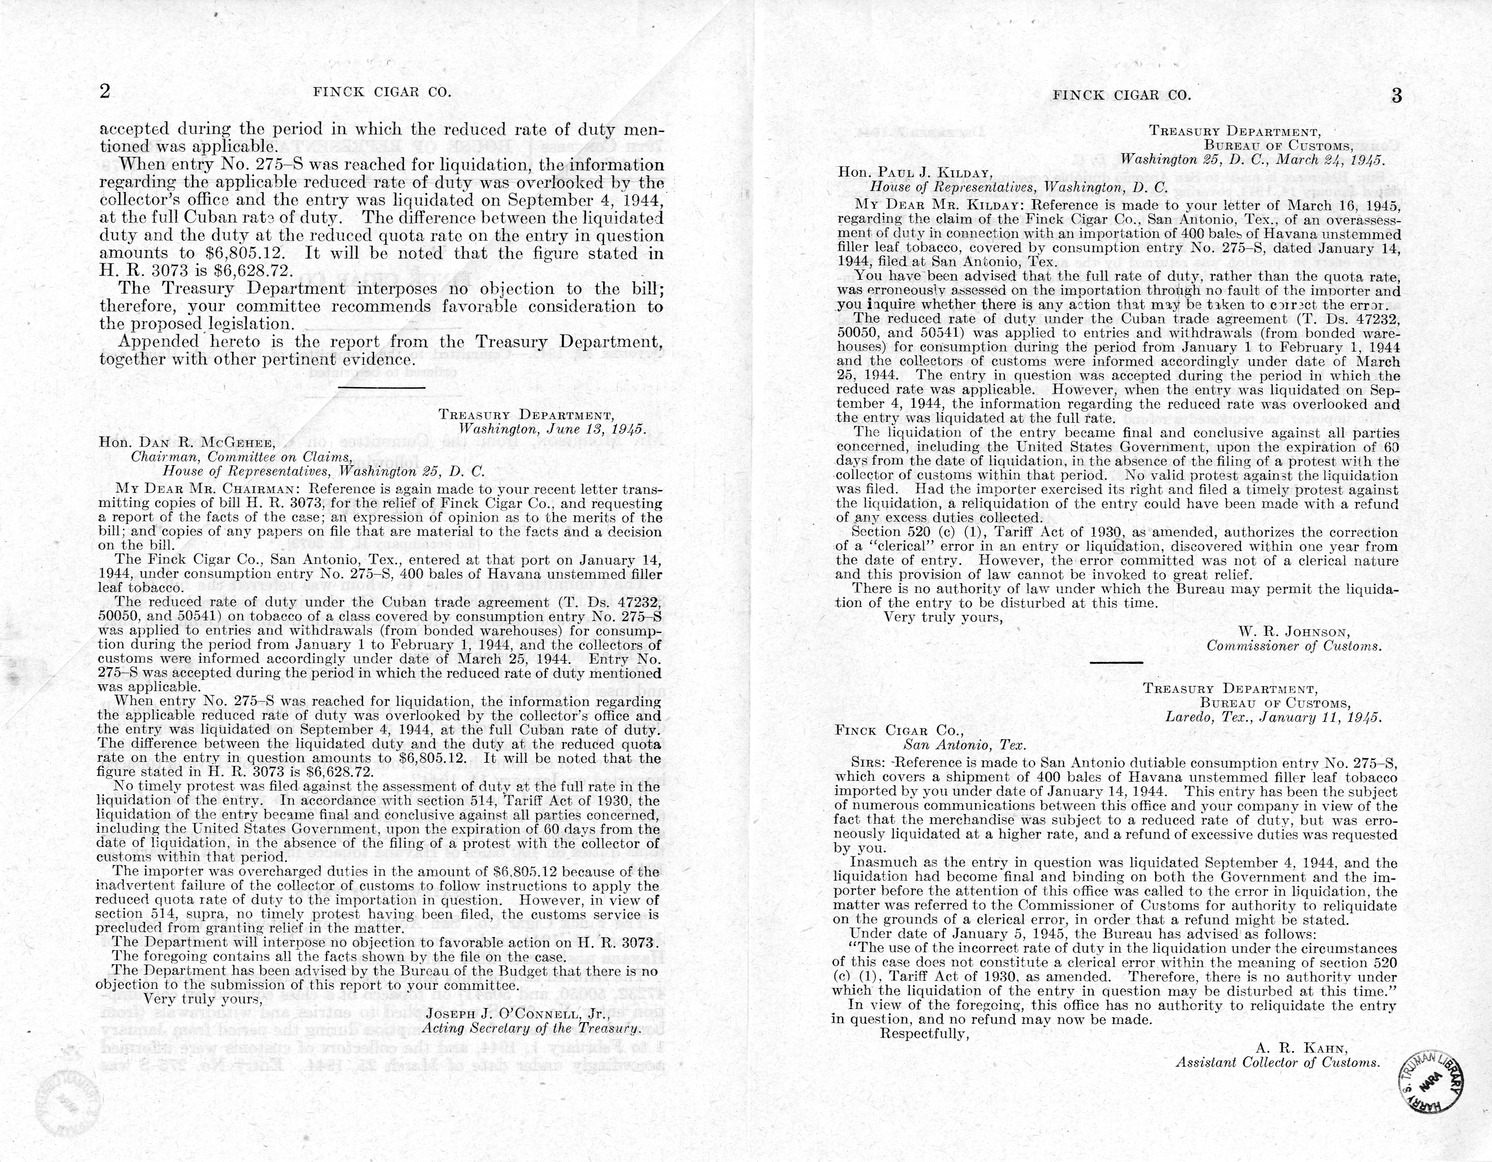 Memorandum from Frederick J. Bailey to M. C. Latta, H.R. 3073, For the Relief of Finck Cigar Company, with Attachments